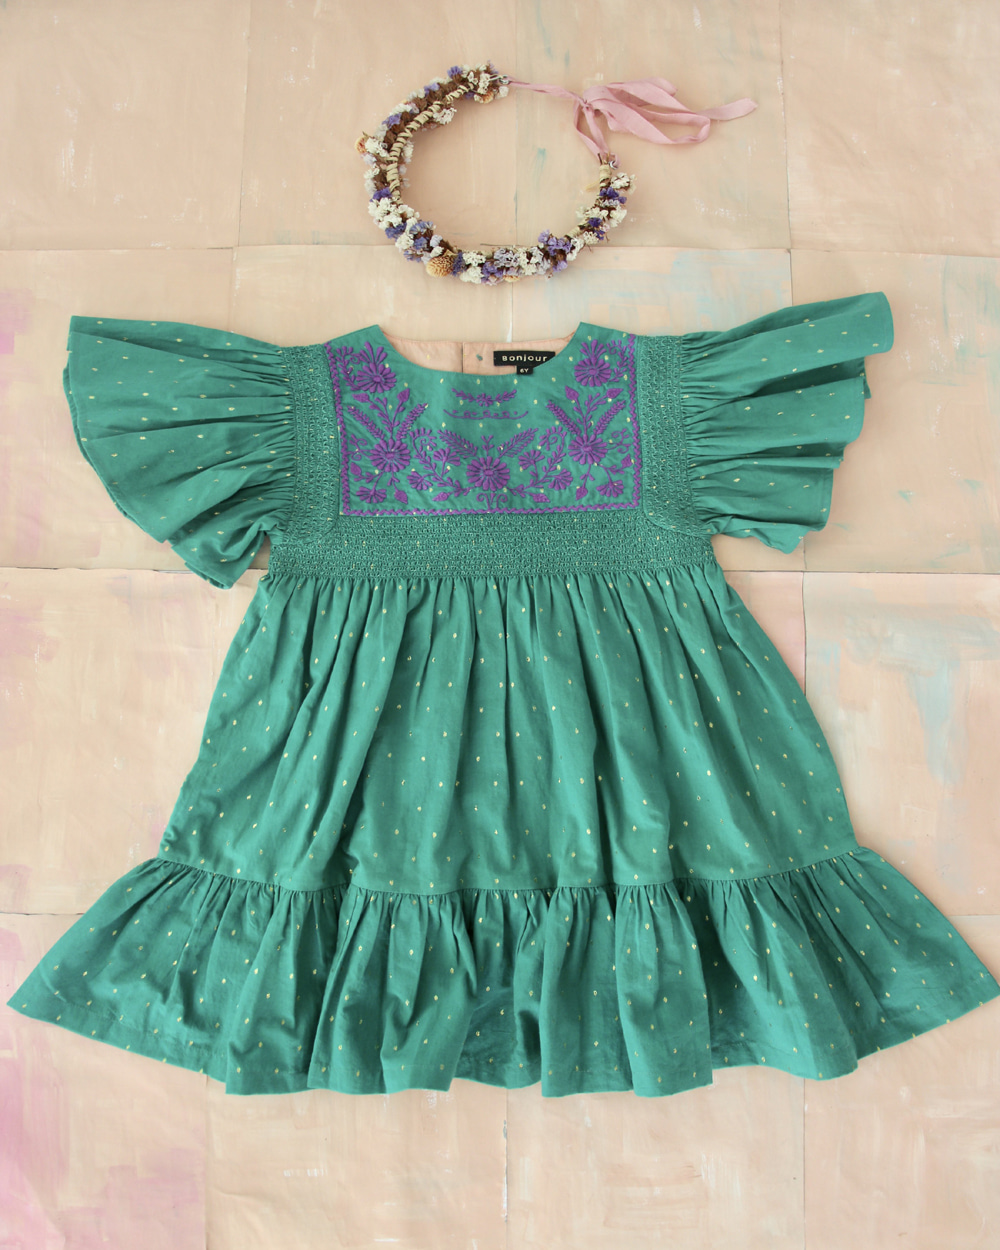 [BONJOUR]New Rosalie dress with new sleeves /green